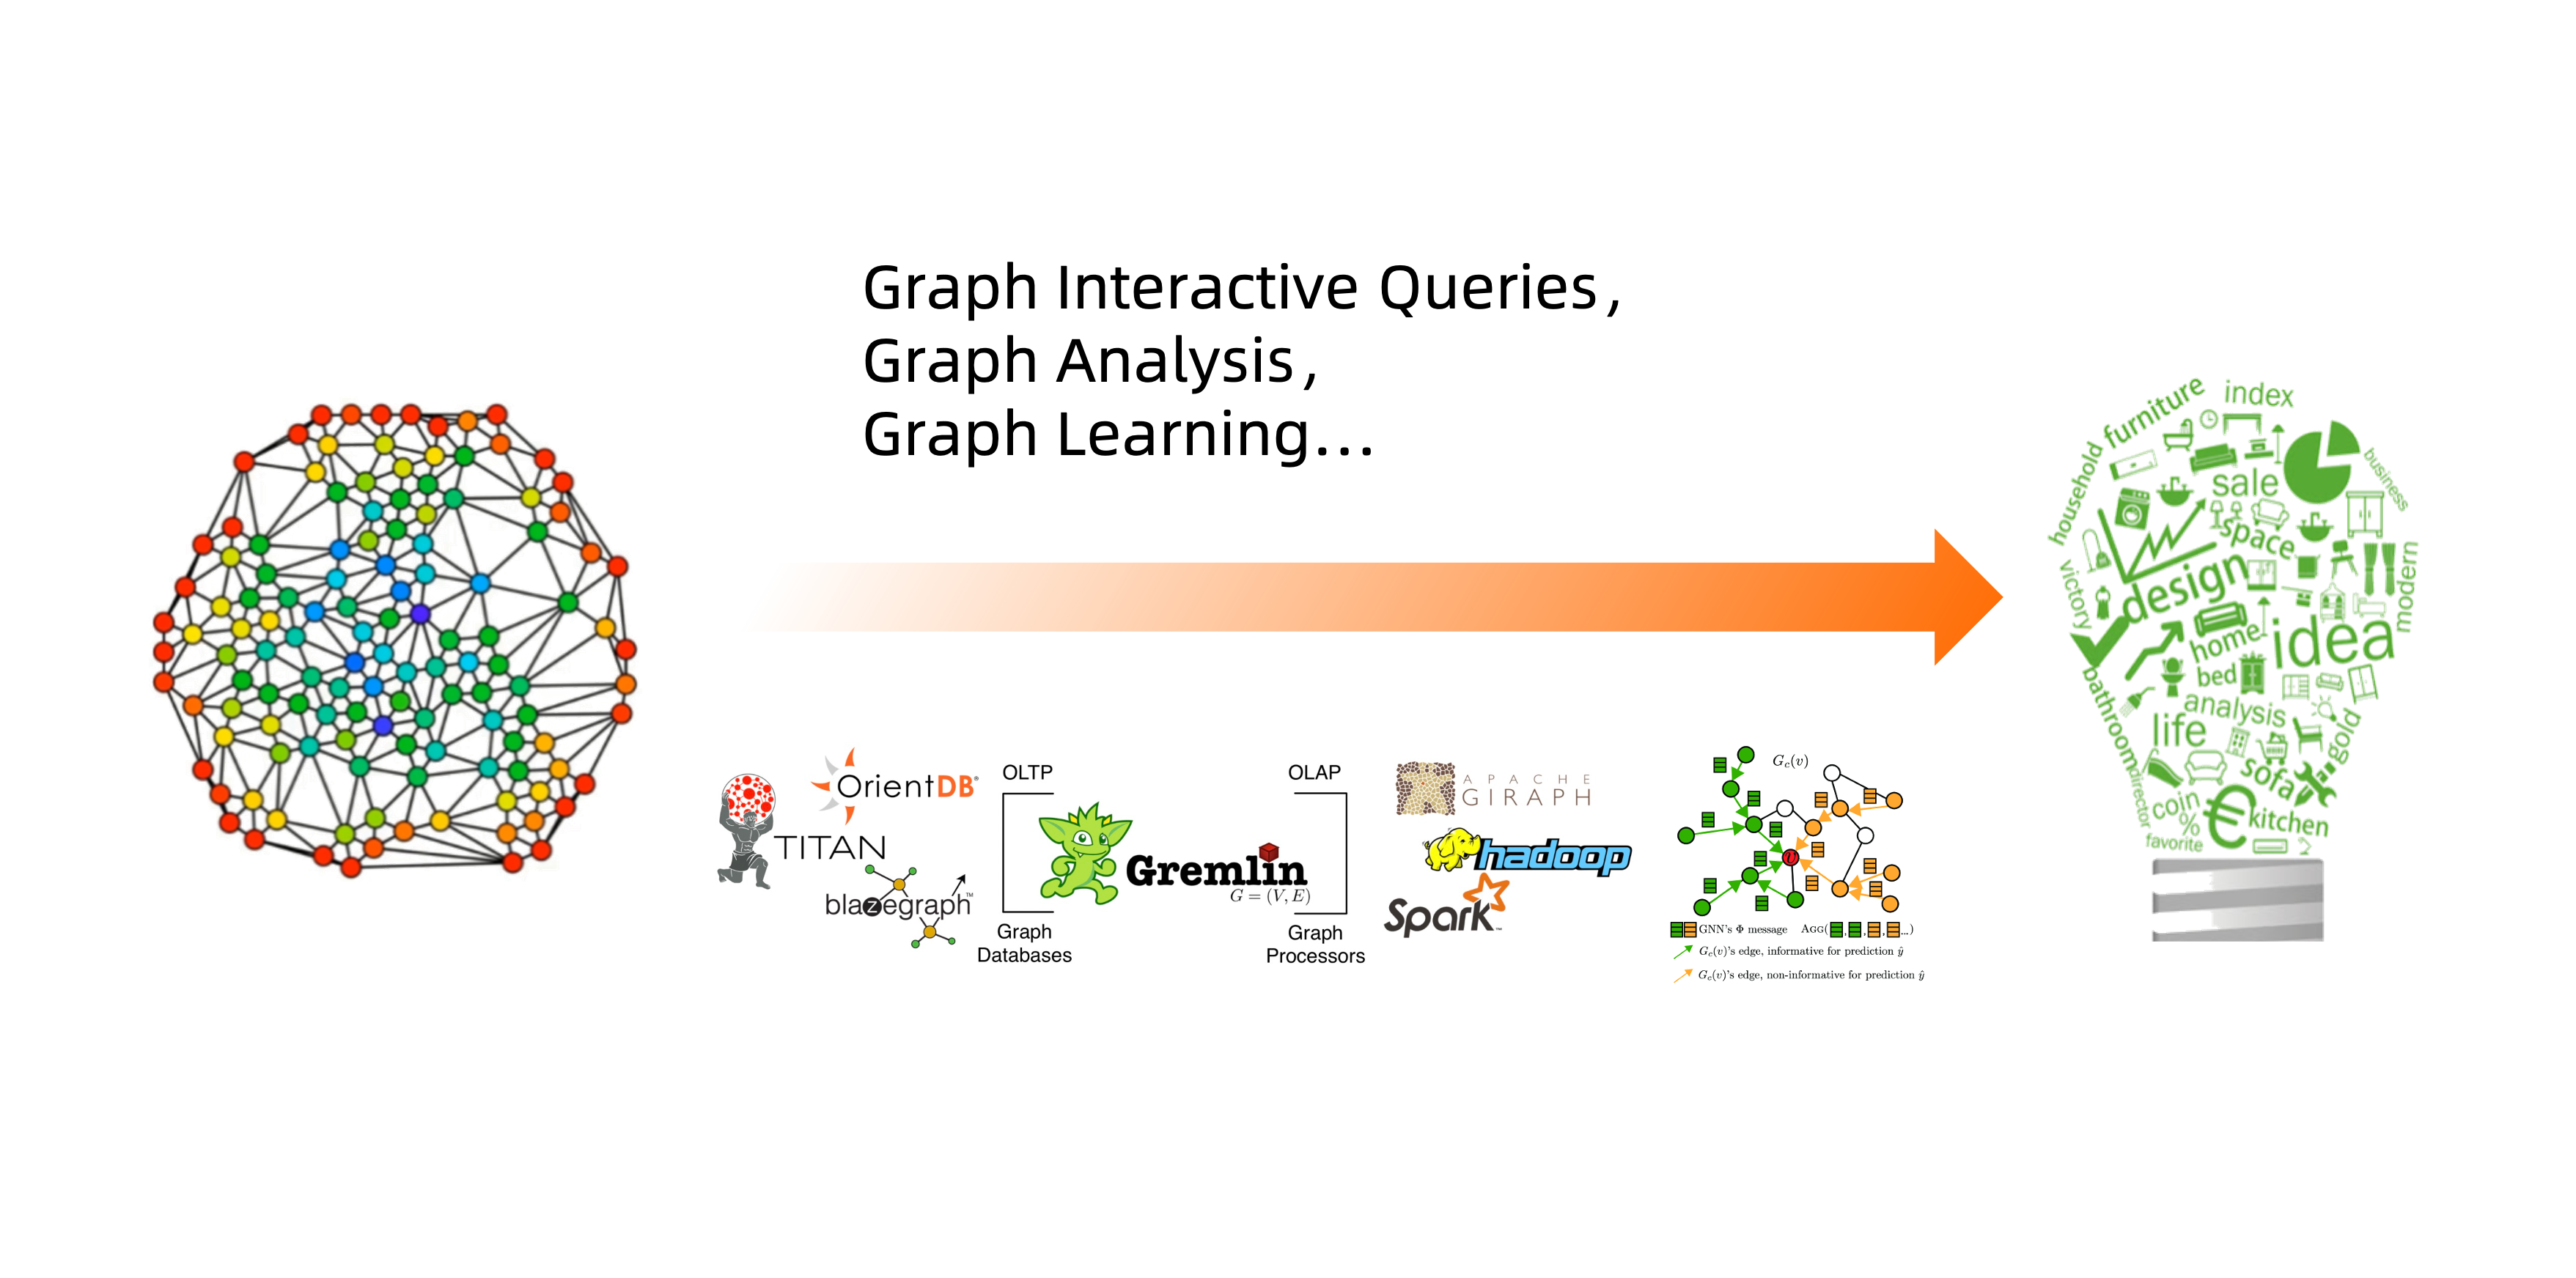 blog: Categories, Languages, and Systems of Graph Computing